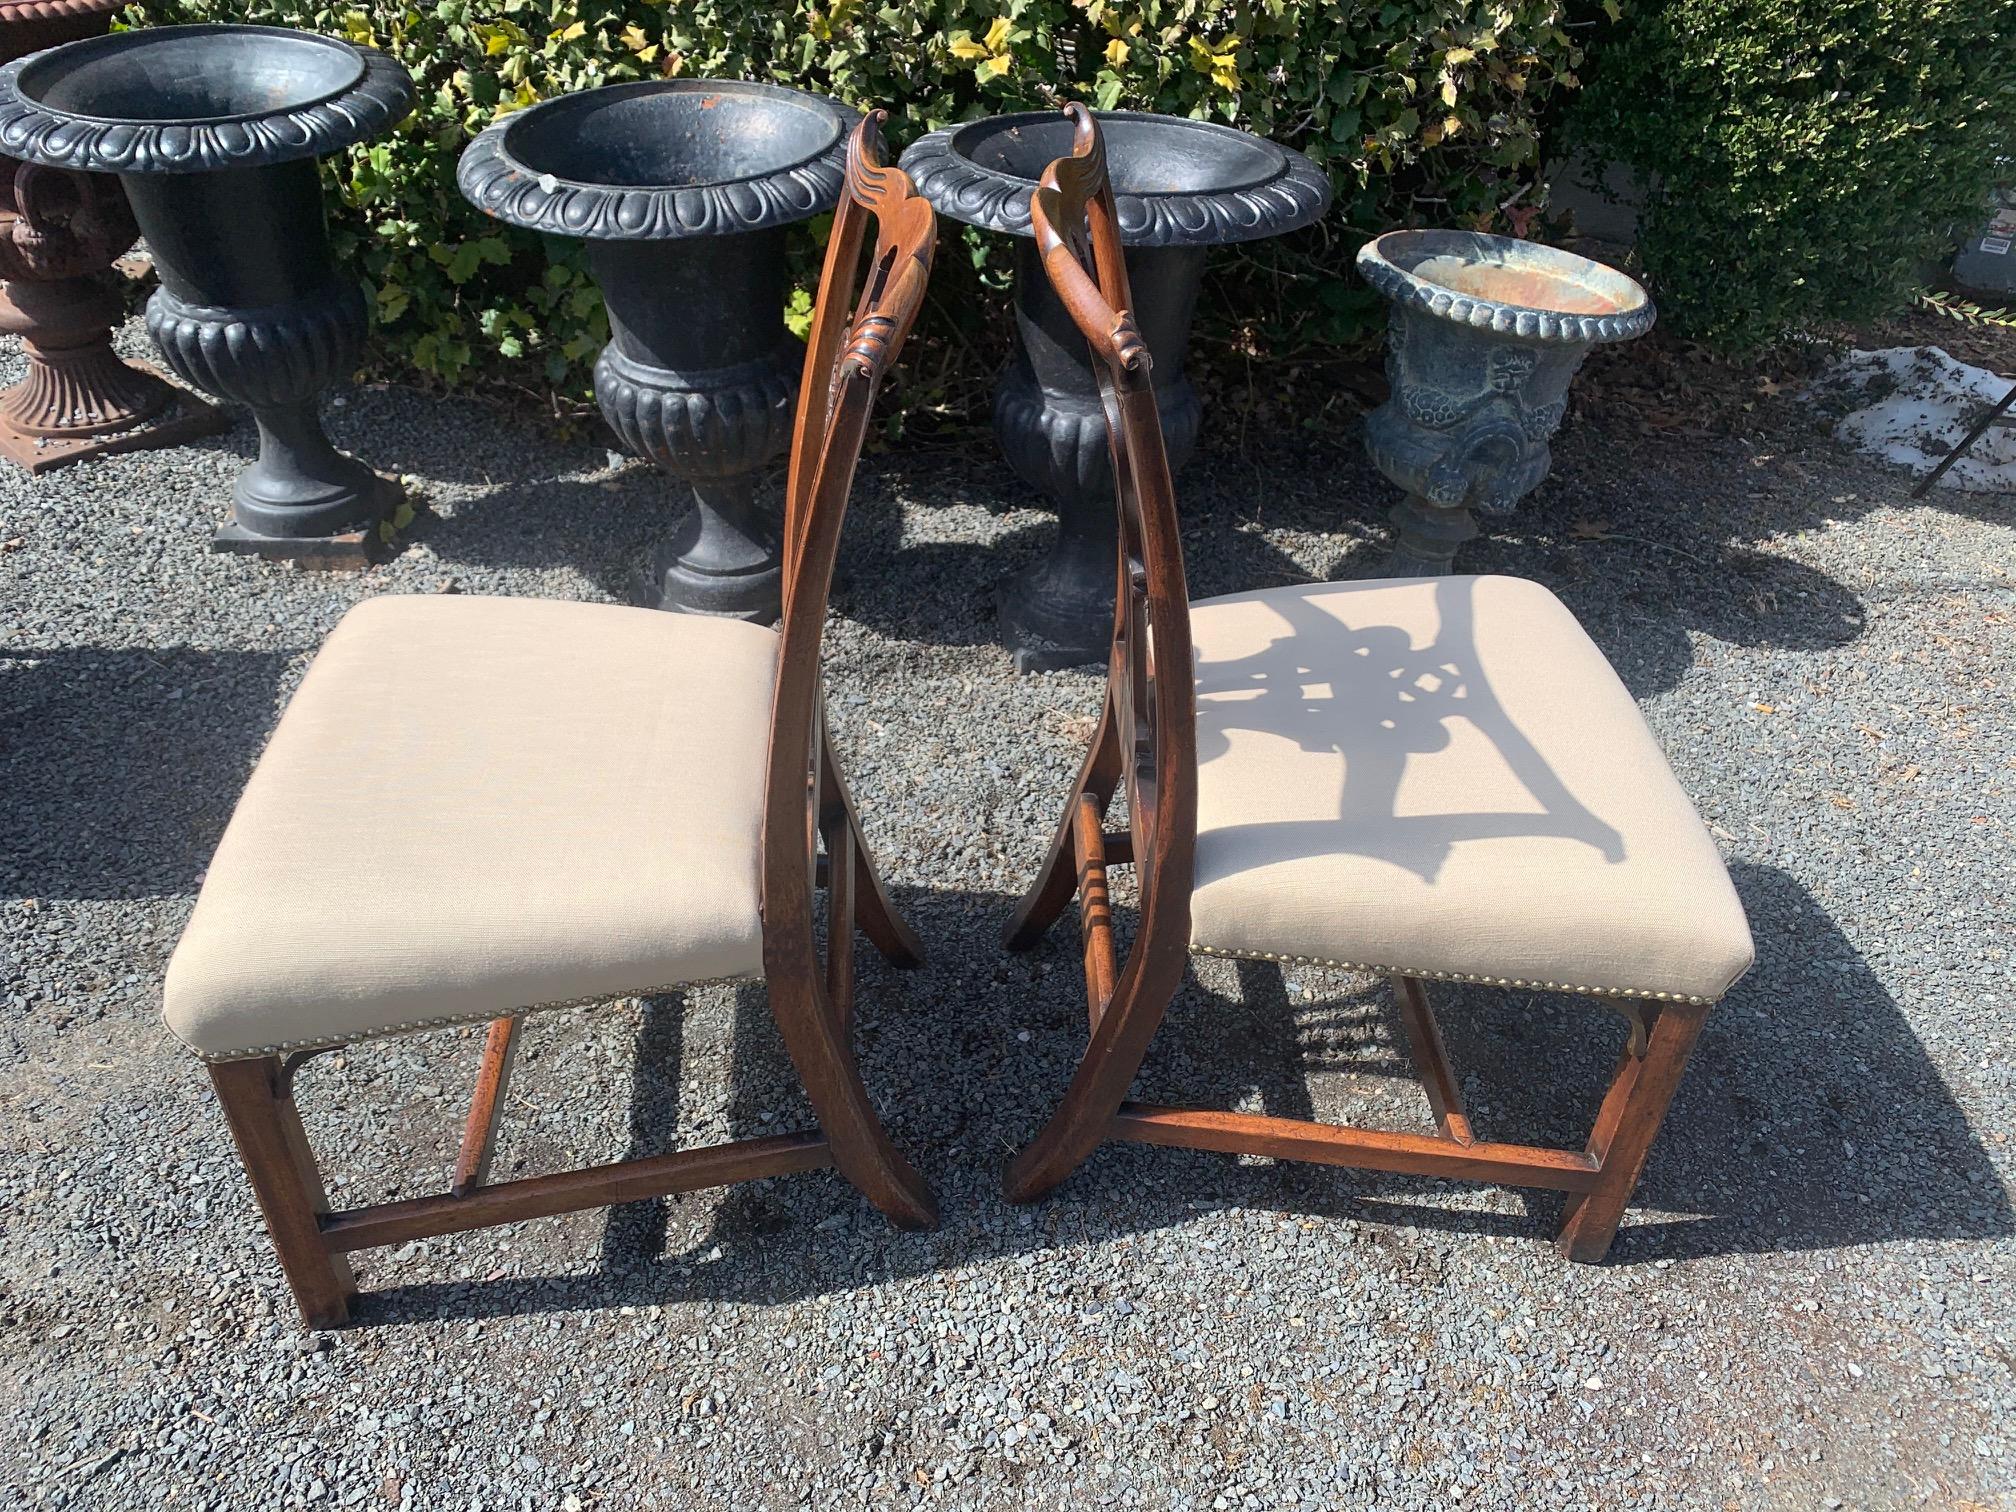 A rare and fine pair of 19th century Chippendale style carved mahogany side chairs having wonderful central tassel and upholstered saddle seats.